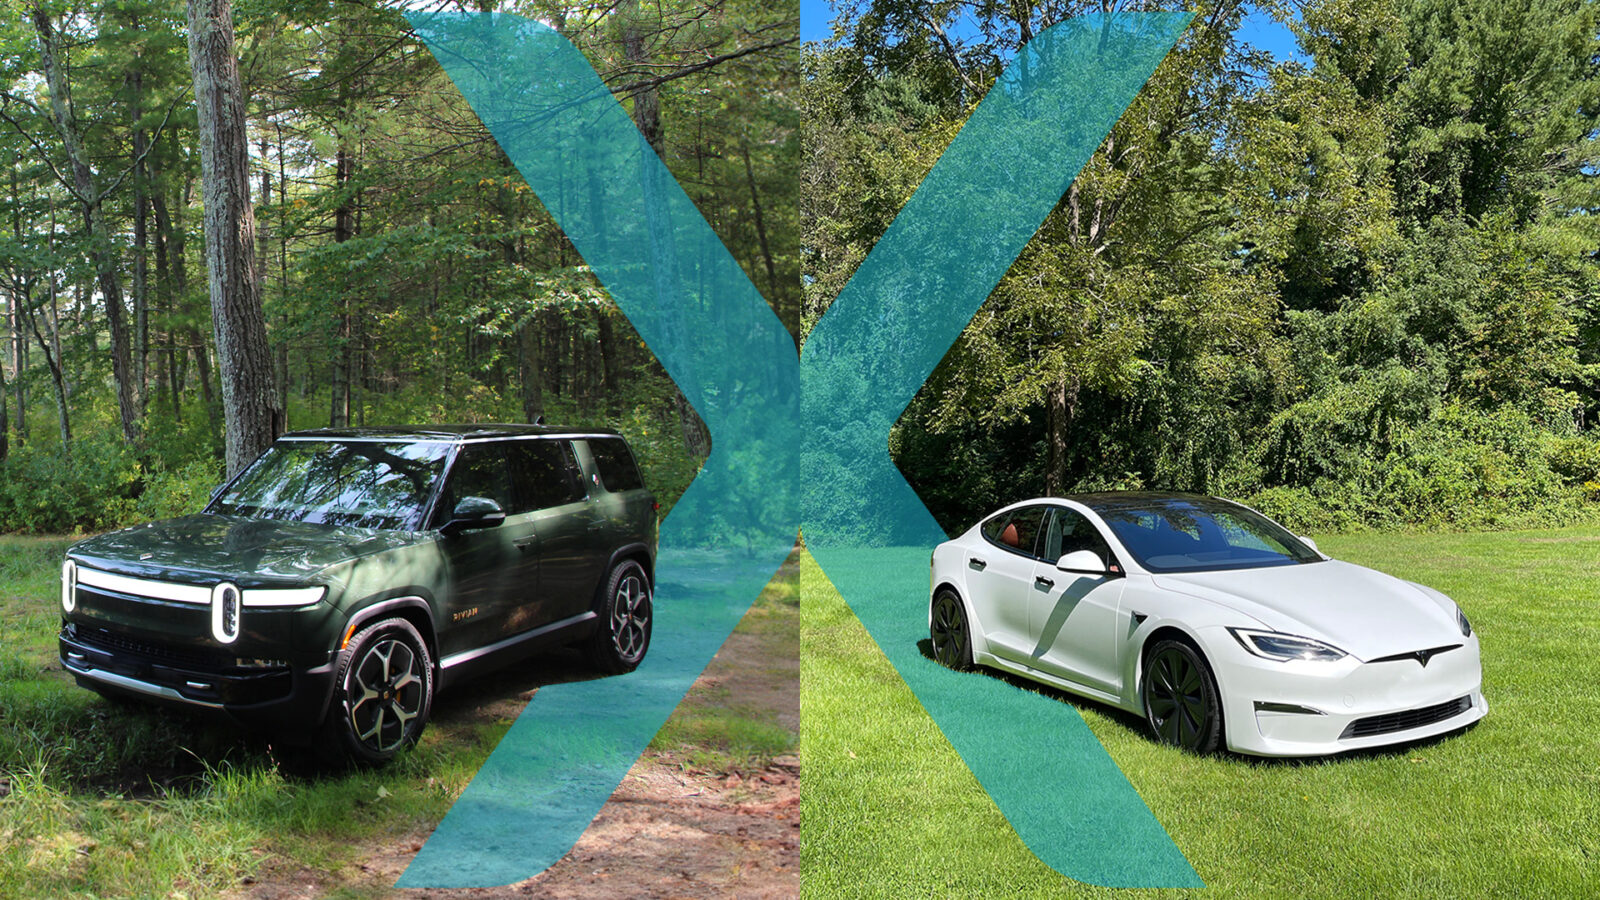 Two cars in a grassy field with trees in the background. A green Rivian R1S on the left and a white Tesla Model X on the right.